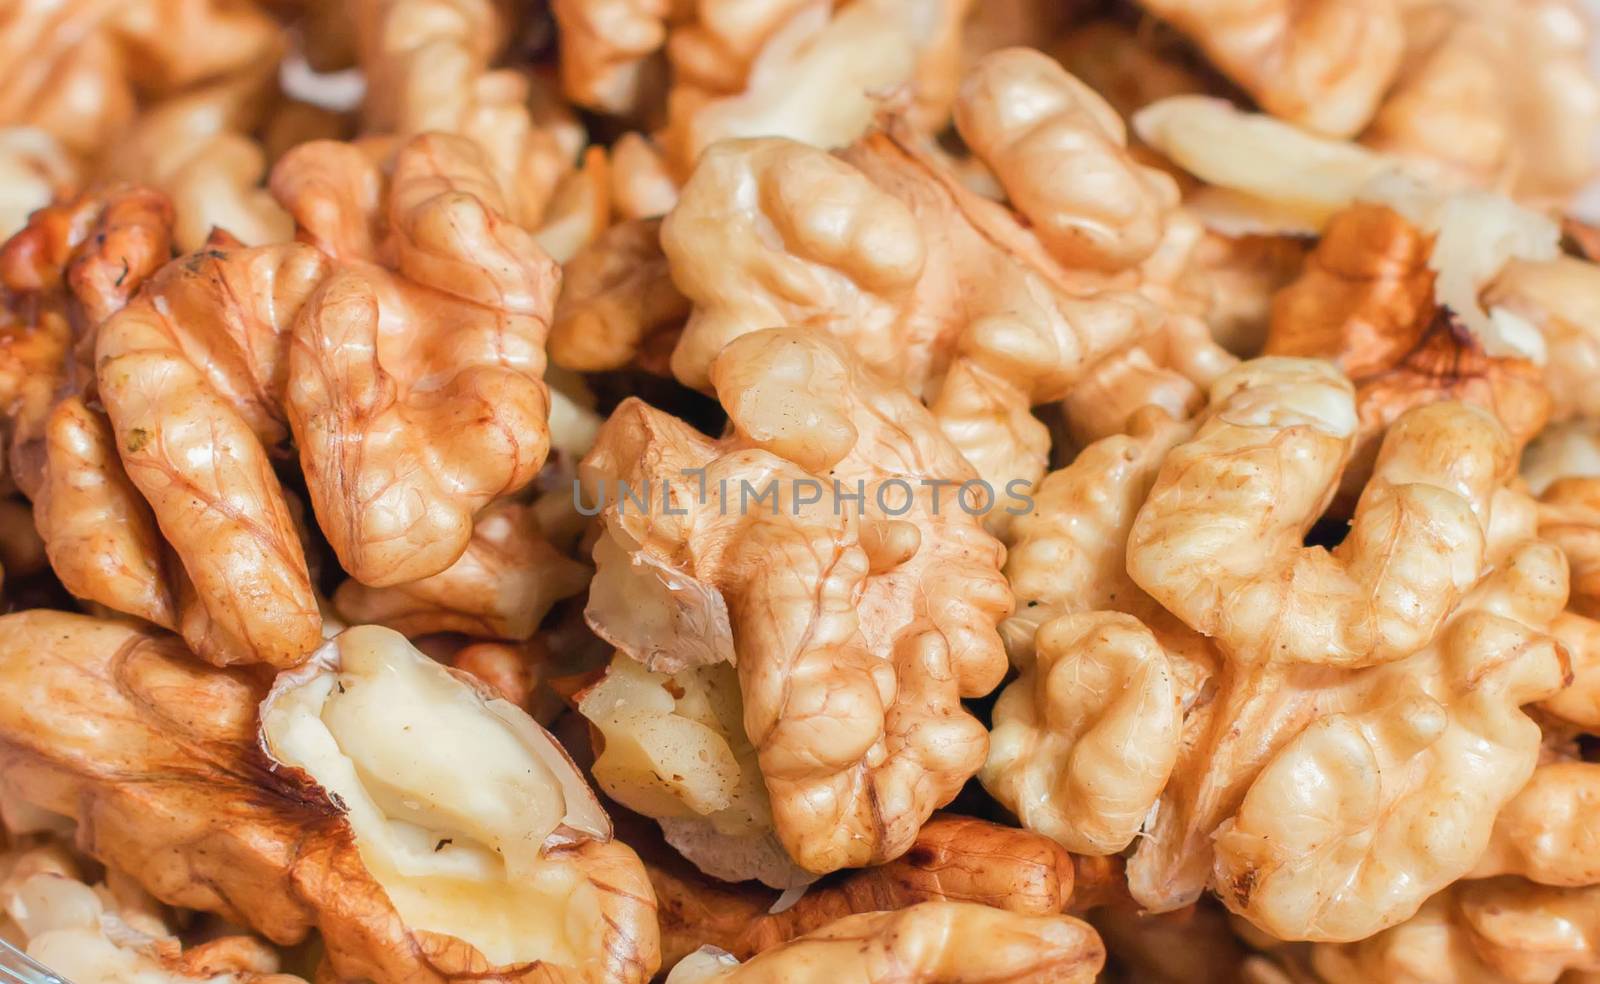 corn kernels walnuts in a glass on a table large lot,texture, background